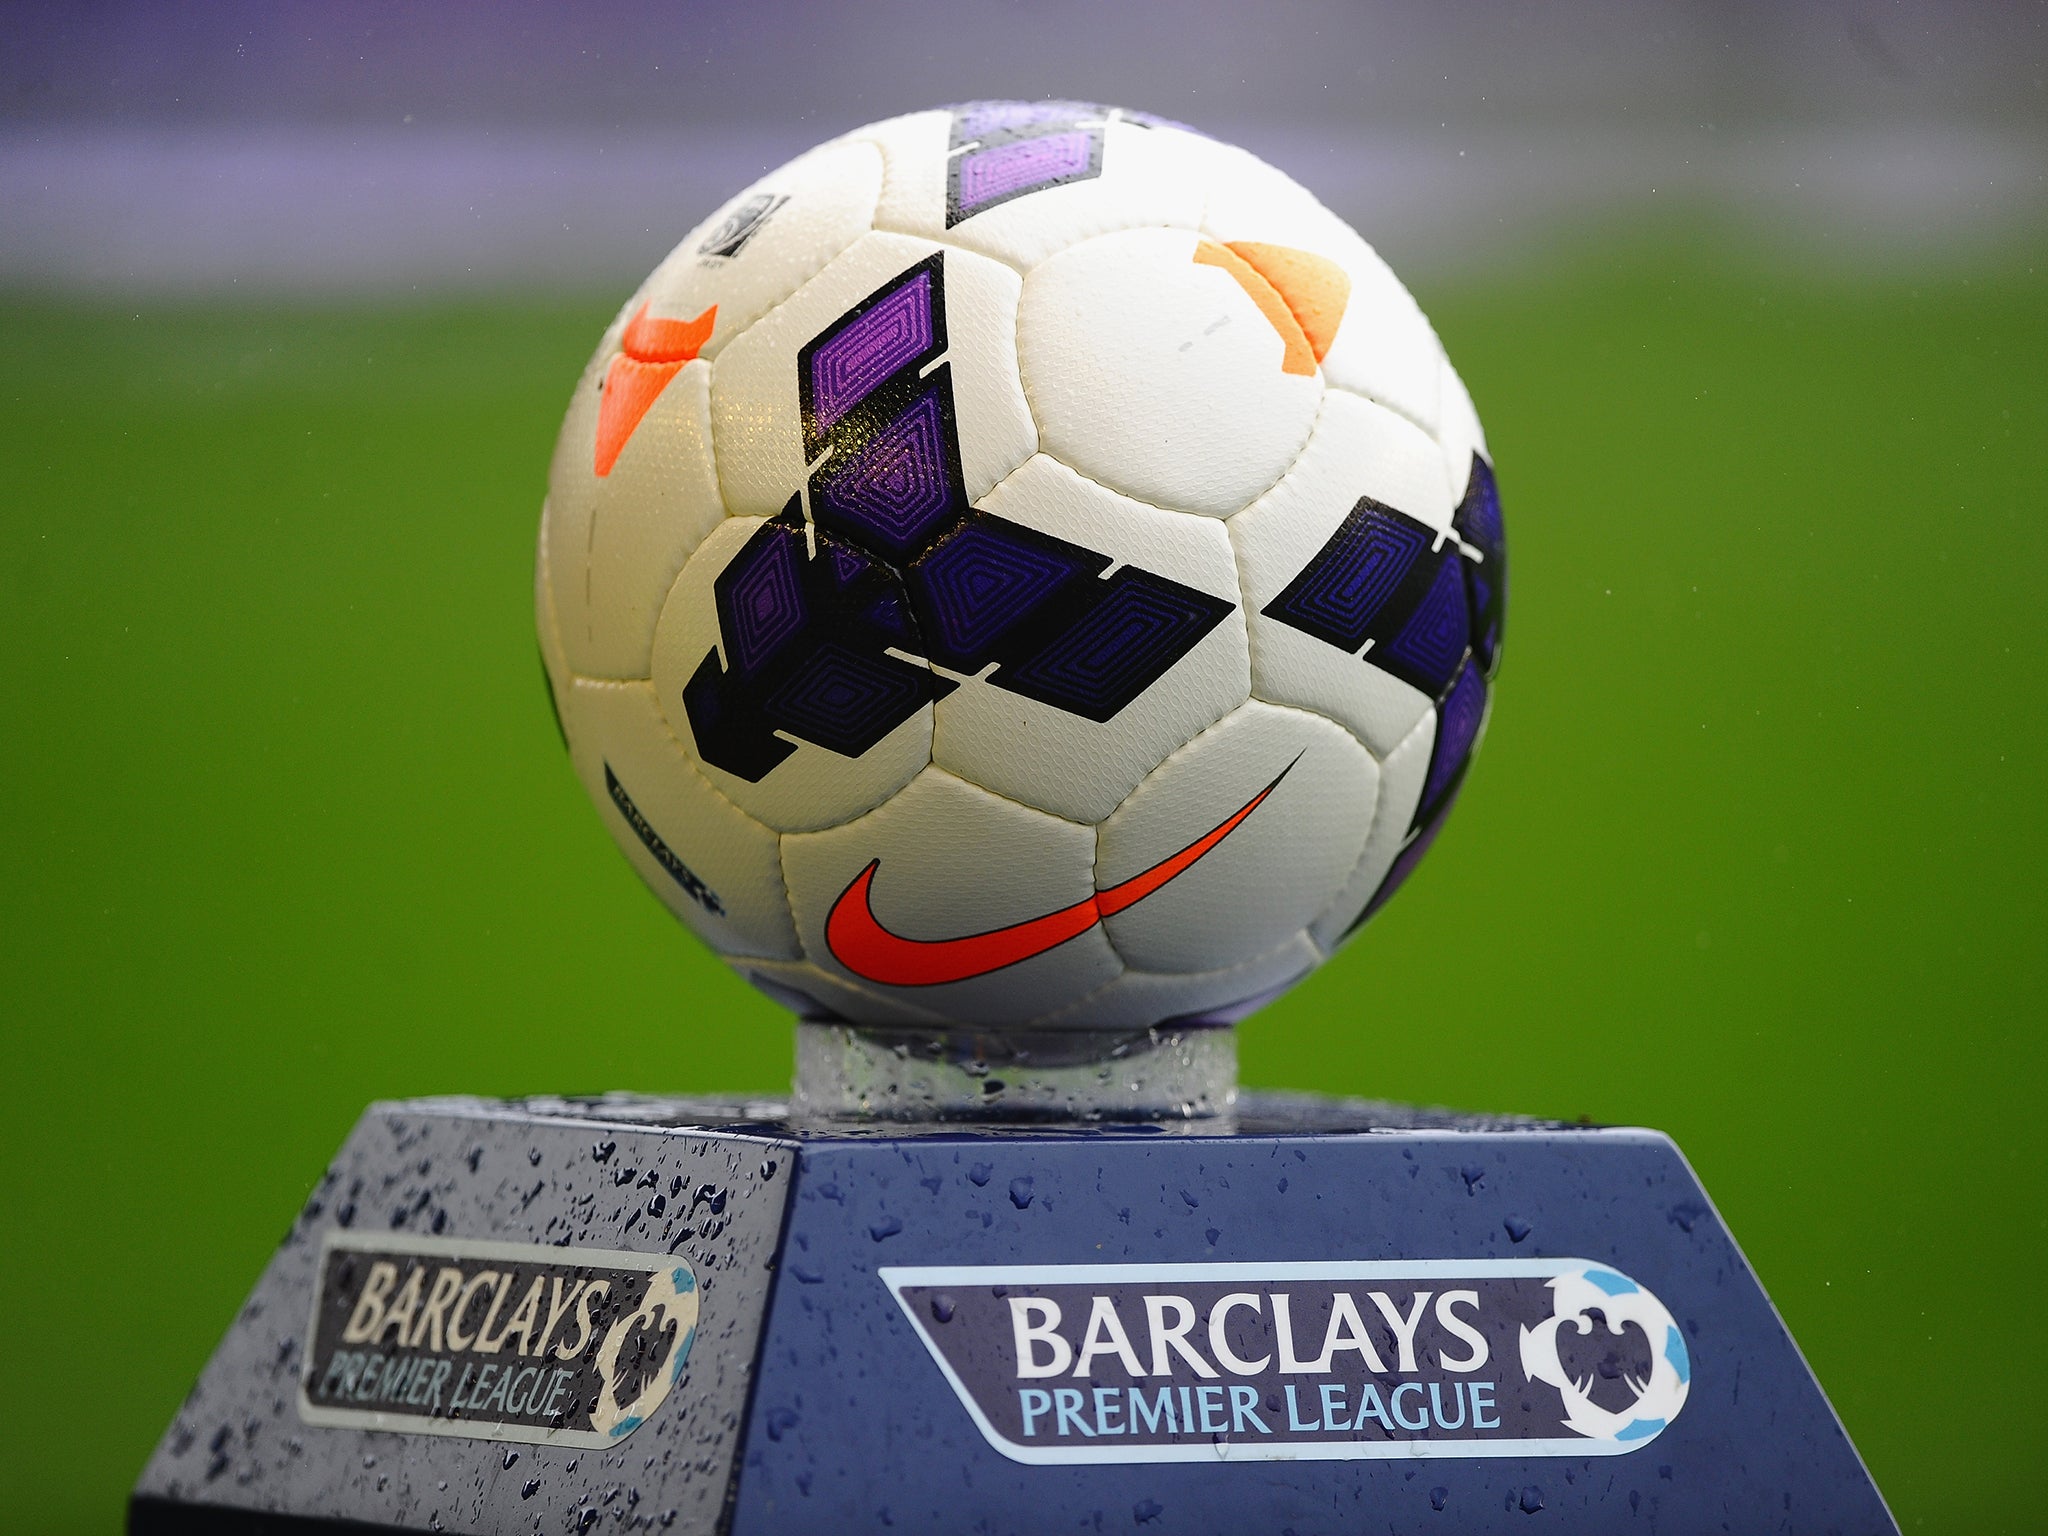 Barclays has sponsored the Premier League for 15 years